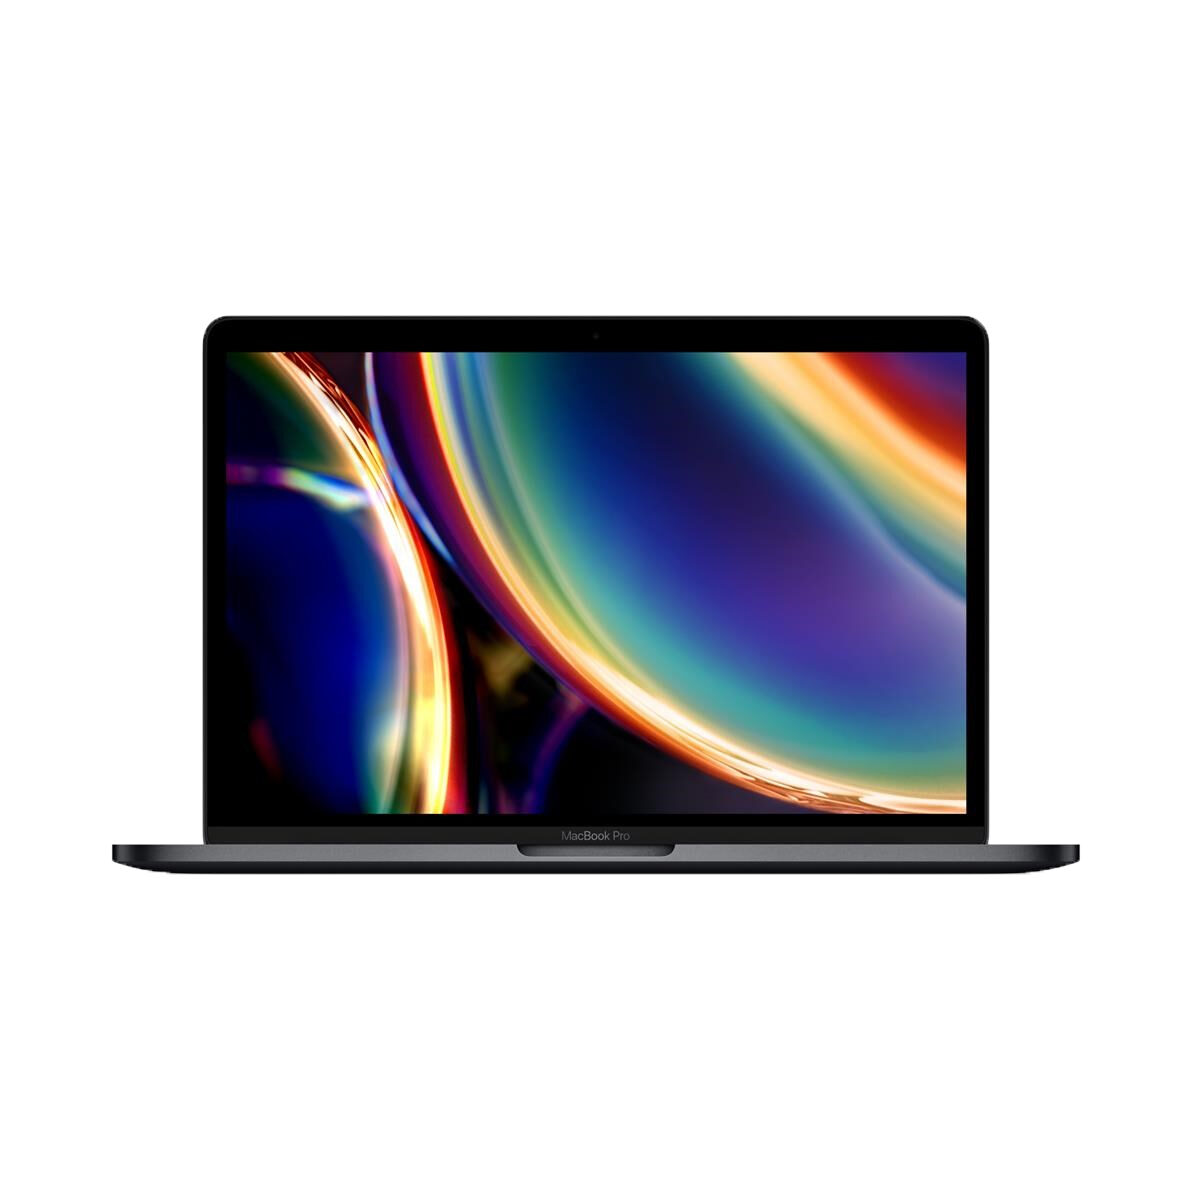 Apple 13-inch MacBook Pro with Touch Bar: 2.0GHz quad-core Intel Core i5